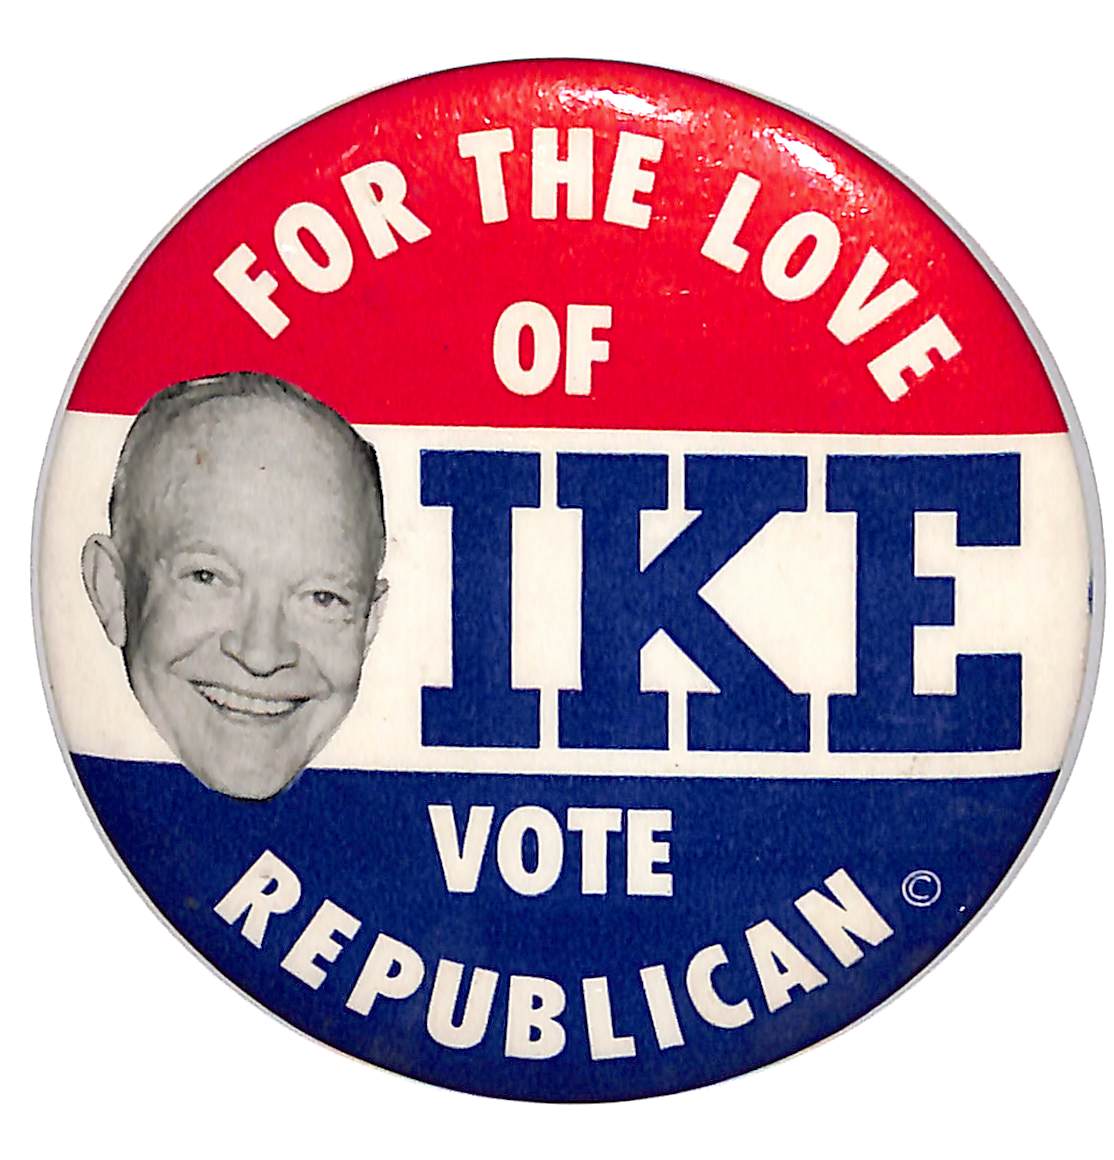 EISENHOWER 1.75" 34TH PRESIDENT campaign badge pin pinback button 1952 DWIGHT D 